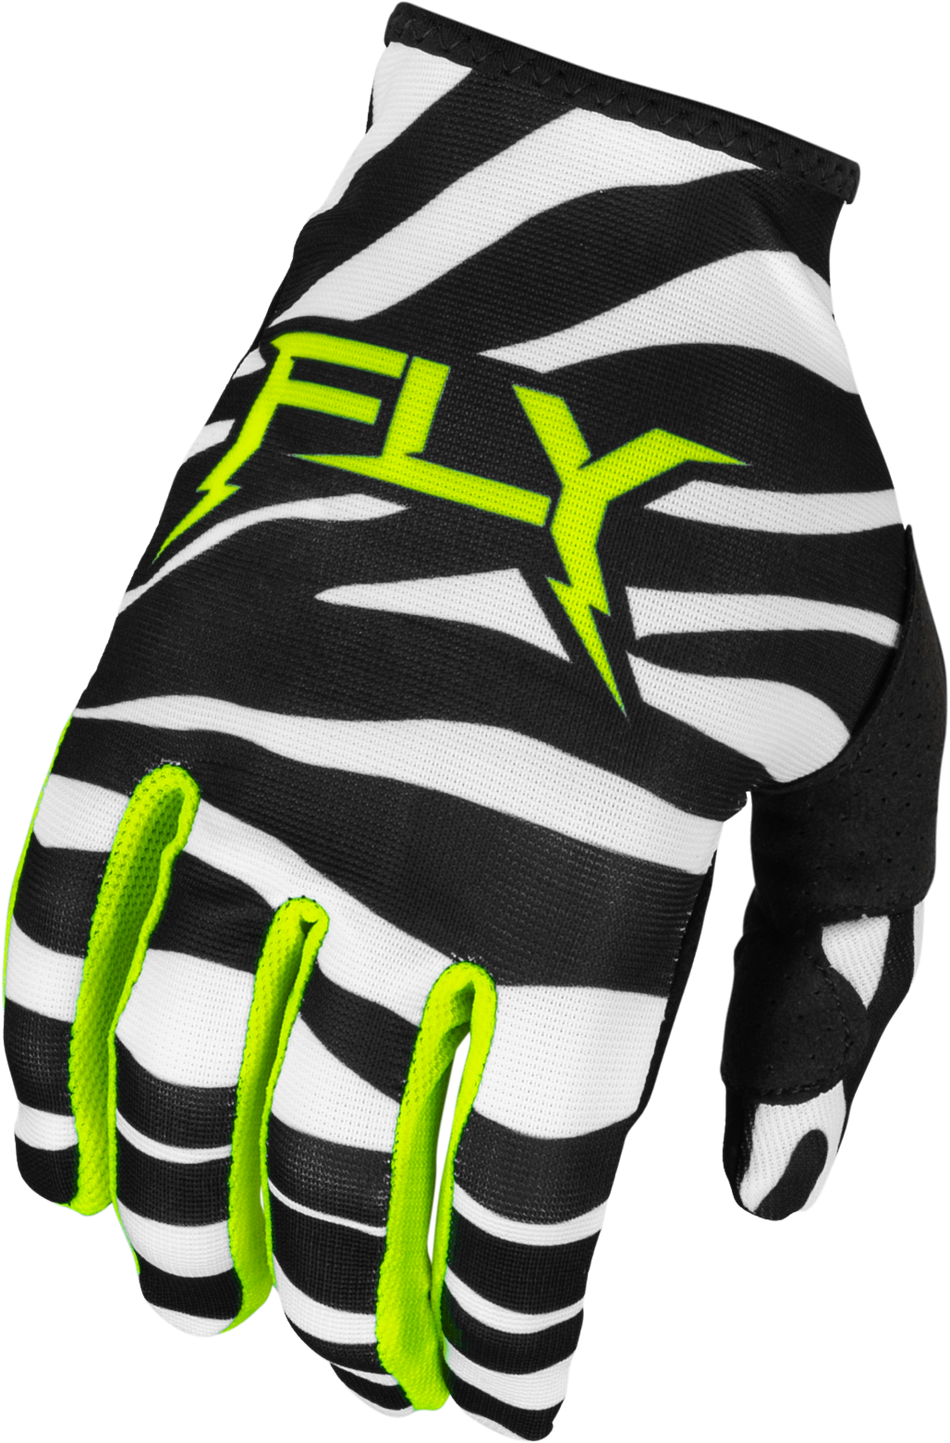 FLY RACING Youth Lite Uncaged Gloves Black/White/Neon Green Ym 377-742YM